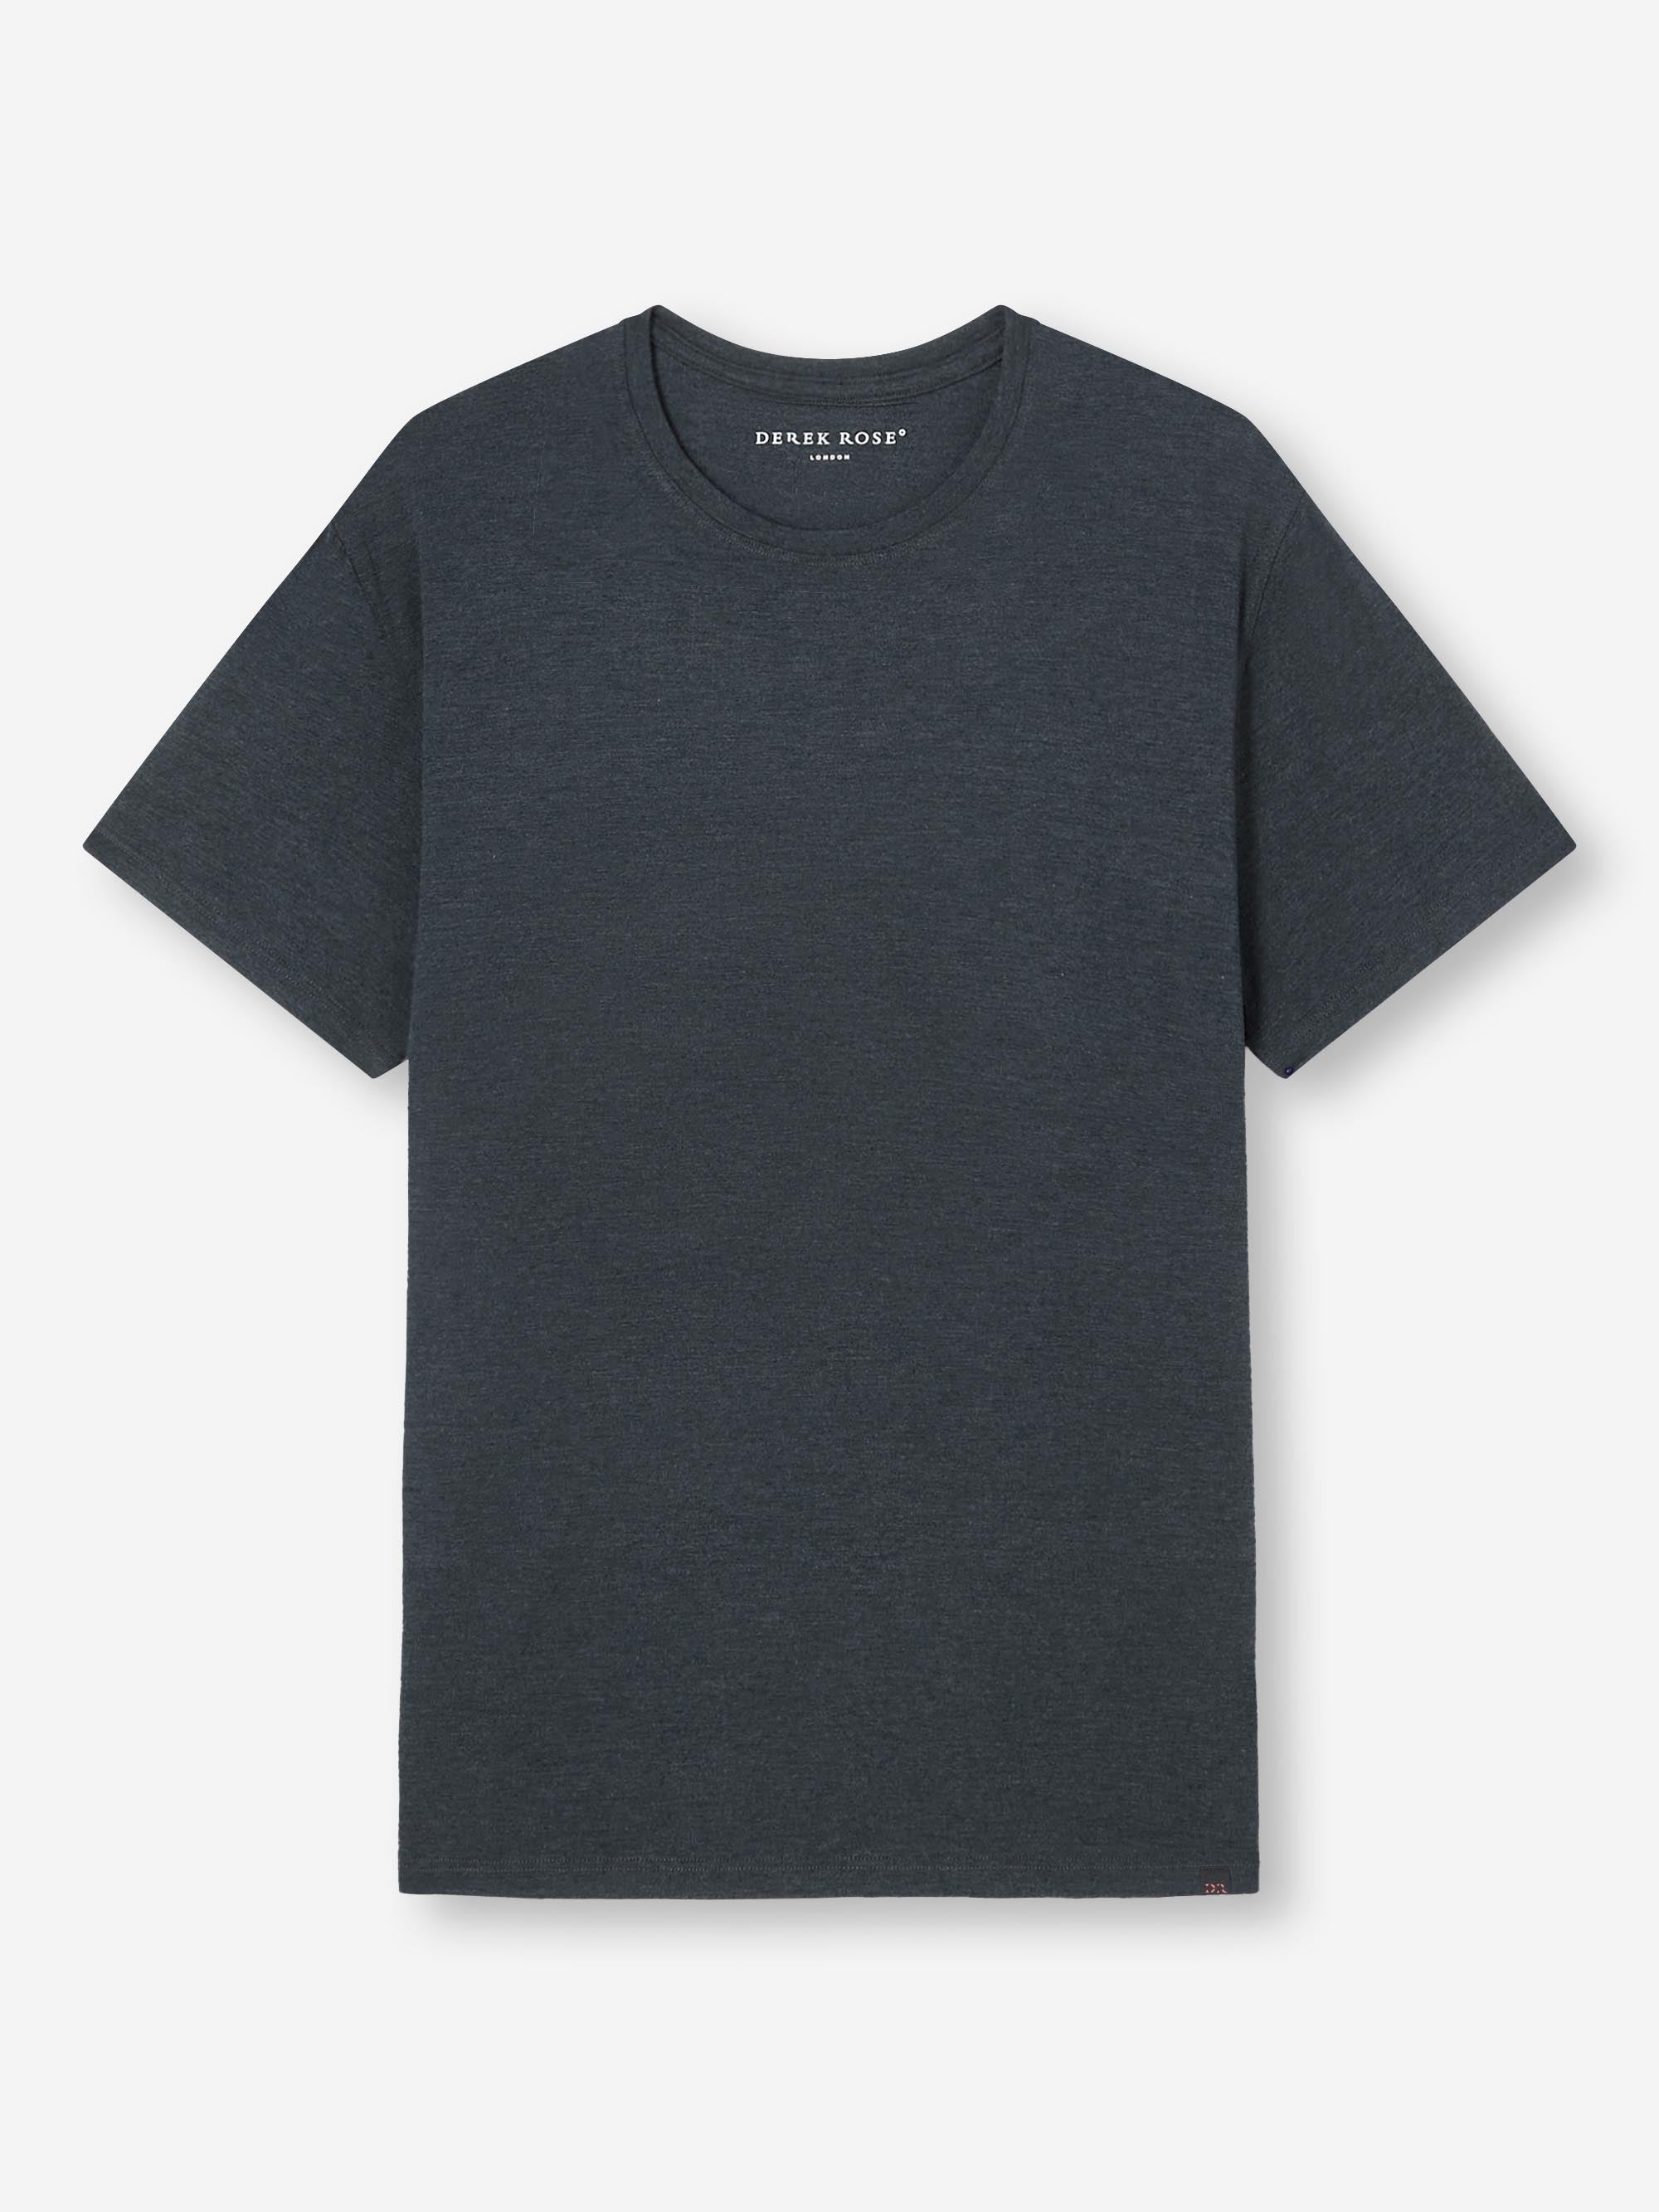 Men's T-Shirt Marlowe Micro Modal Stretch Anthracite